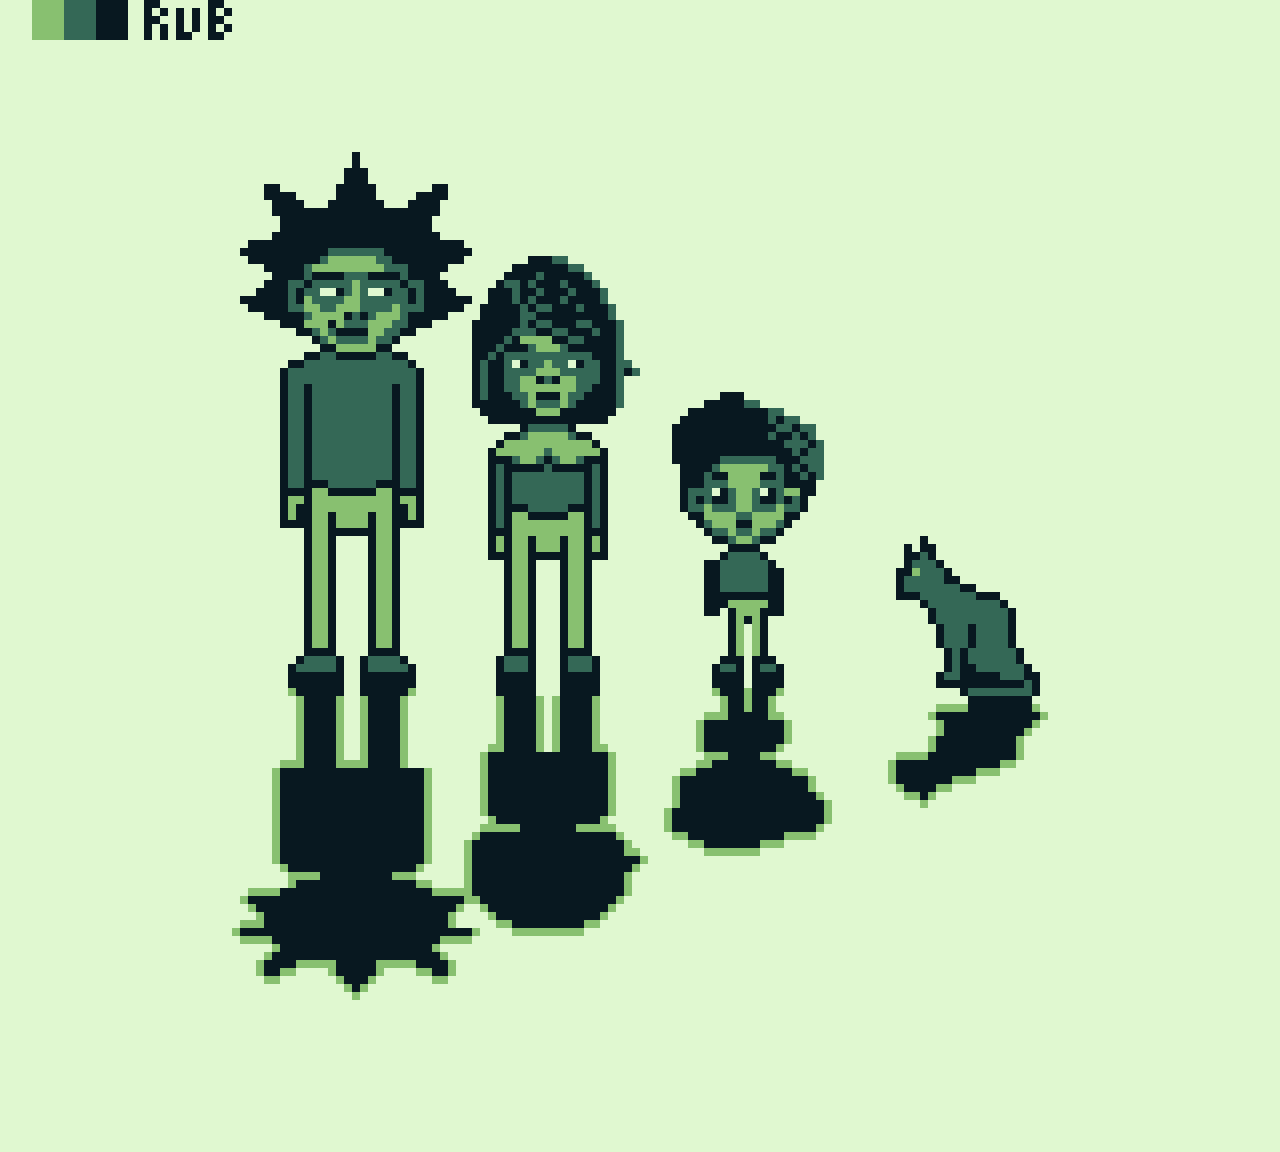 pixel art in green shades, with a man, woman, child and cat